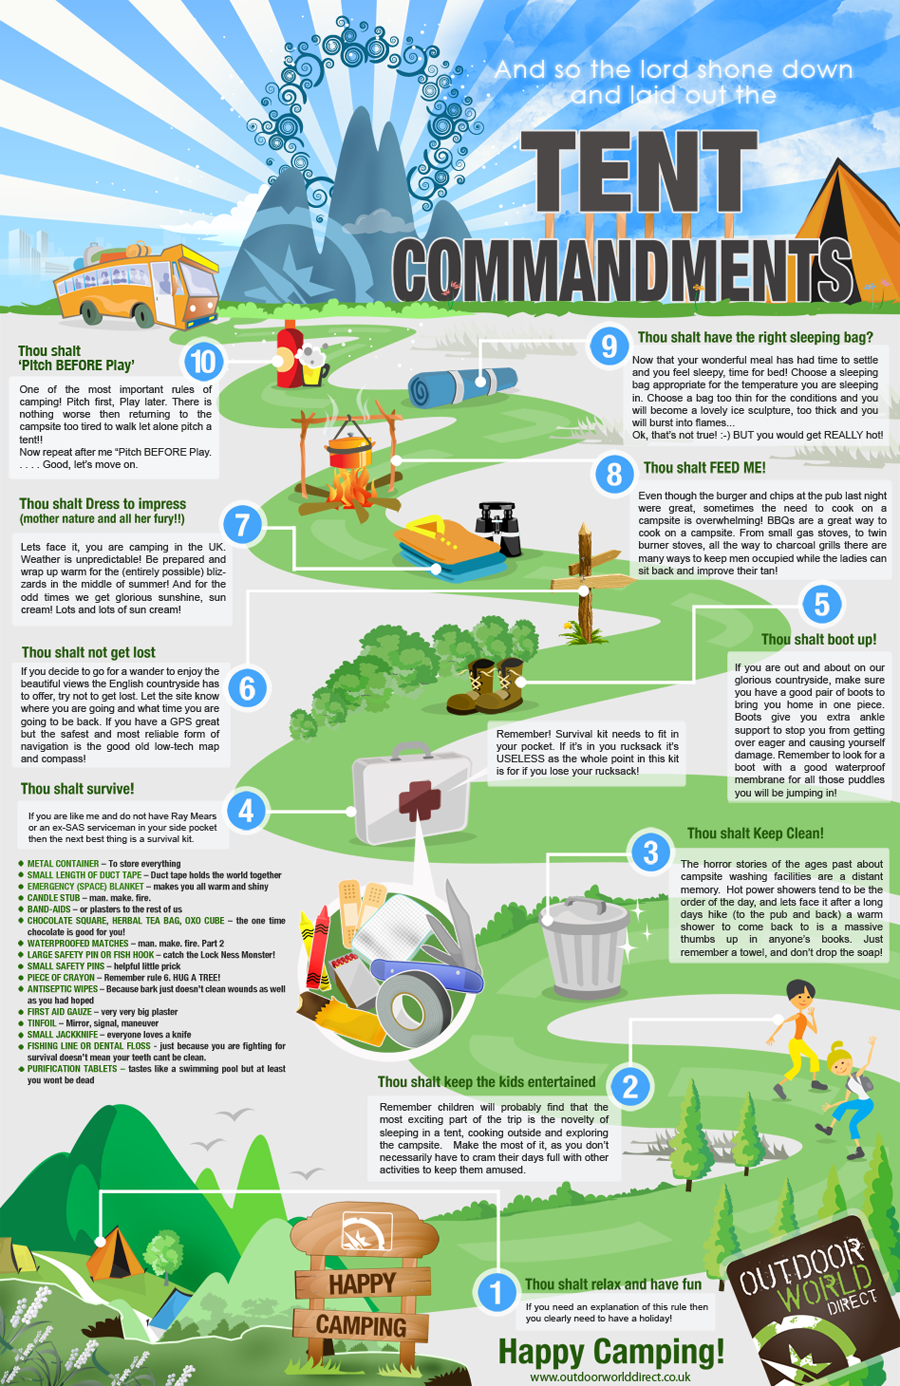 You are currently viewing The Tent Commandments